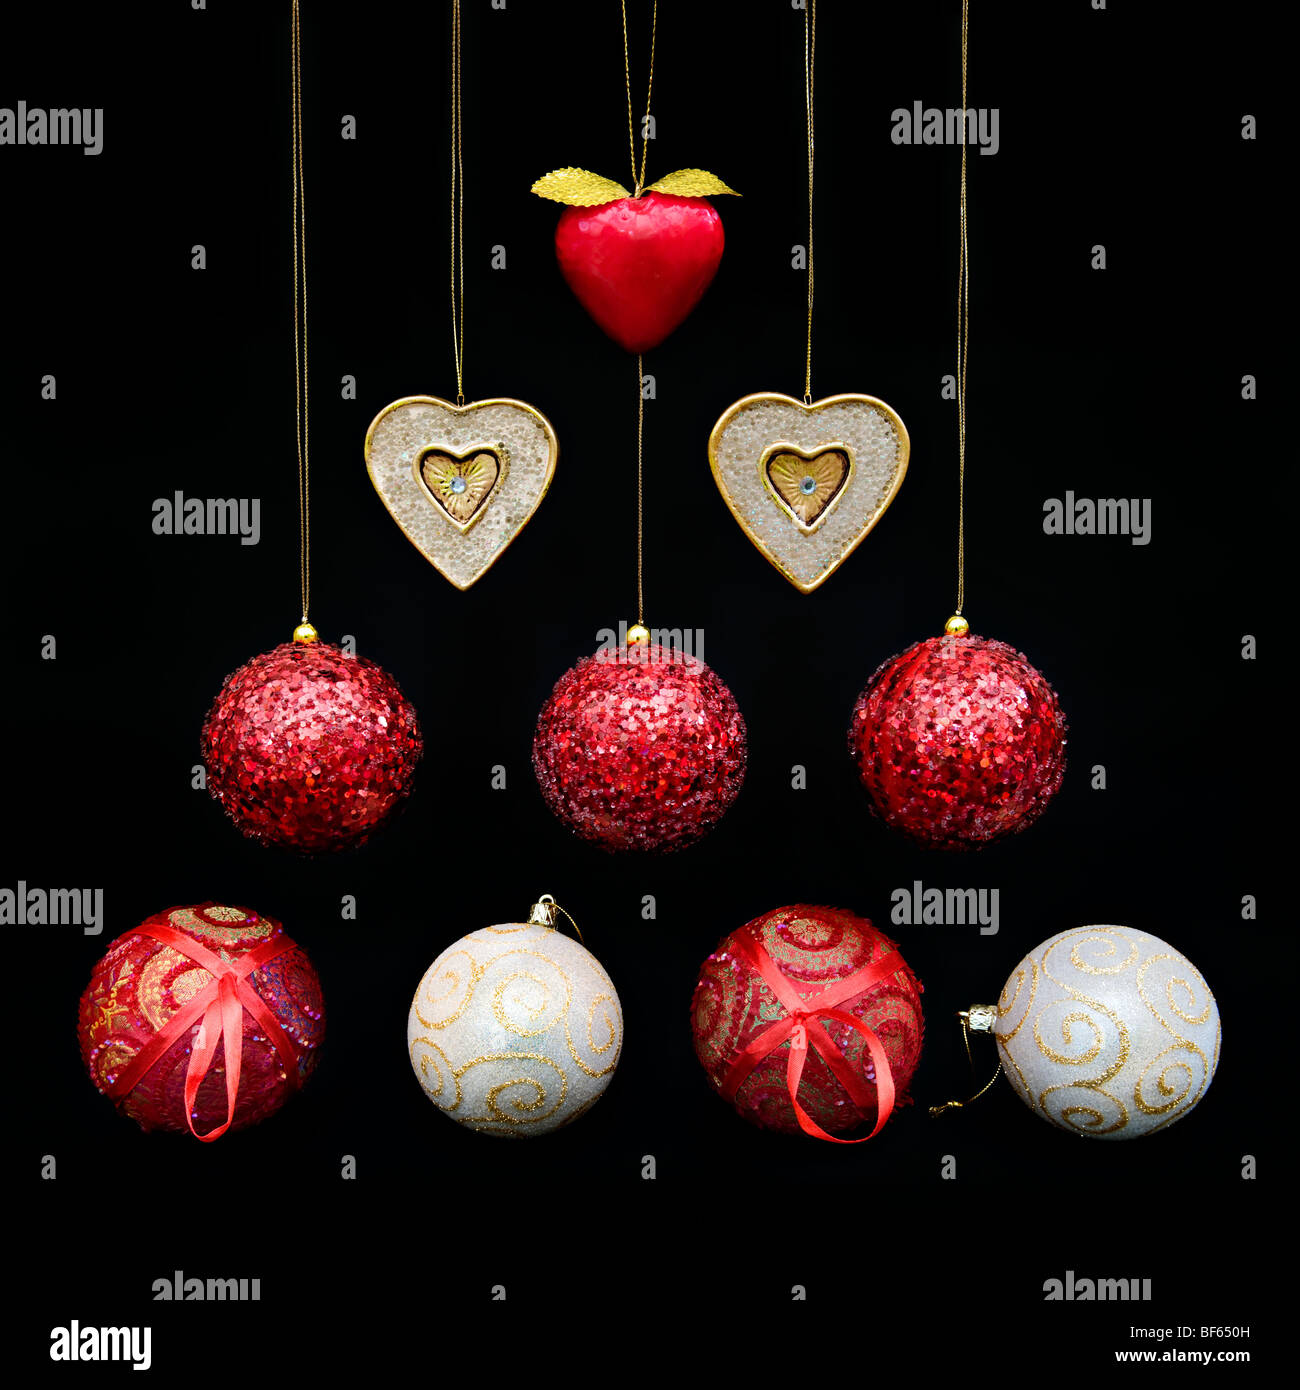 Modern picture of mixed red and gold Christmas decorations and baubles shaped into a Christmas tree design on black background Stock Photo